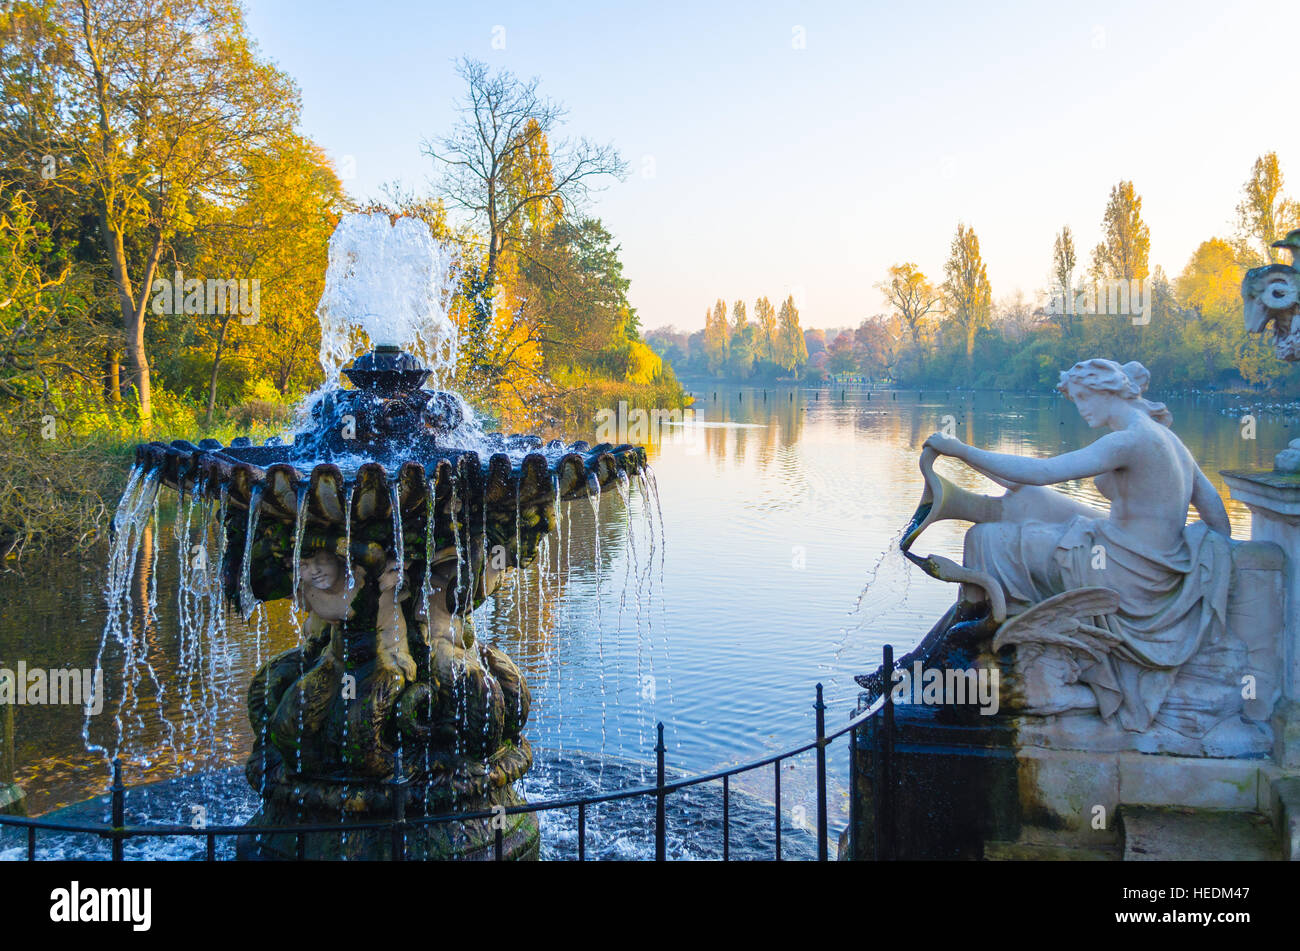 A sculpture and fountain by the Serpentine Lake at Hyde Park in autumn, London Stock Photo